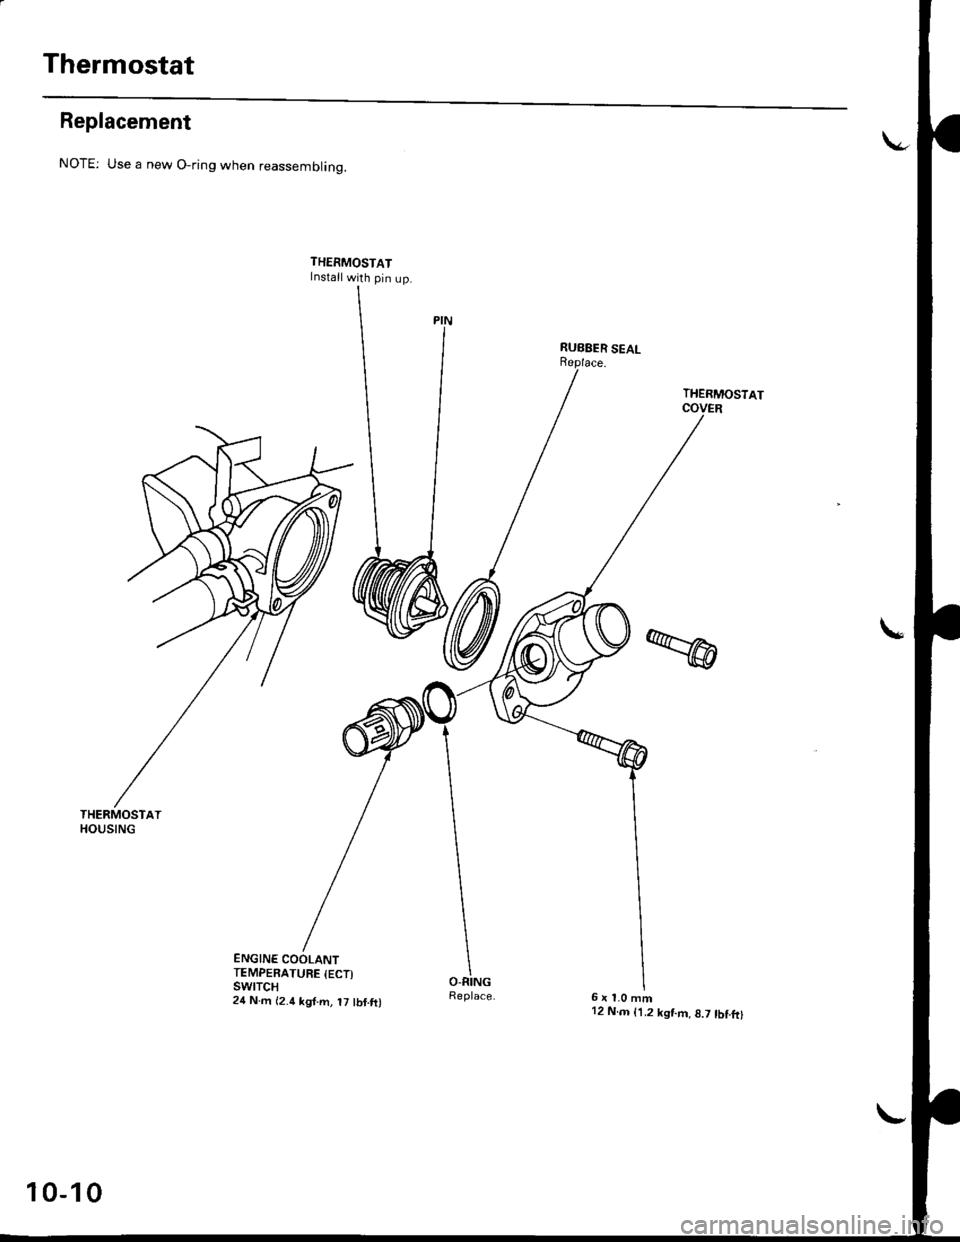 HONDA CIVIC 1999 6.G Workshop Manual Thermostat
Replacement
THERMOSTATHOUSING
NOTE: Use a new O-ring when reassemblinq.
THERMOSTATInstall with pin up.
ENGINE COOLANTTEMPERATURE {ECT)swtTcH24 N.m {2.4 kgf.m, t7 tbf.ft)
THERMOSTAT
6x1.0mm1